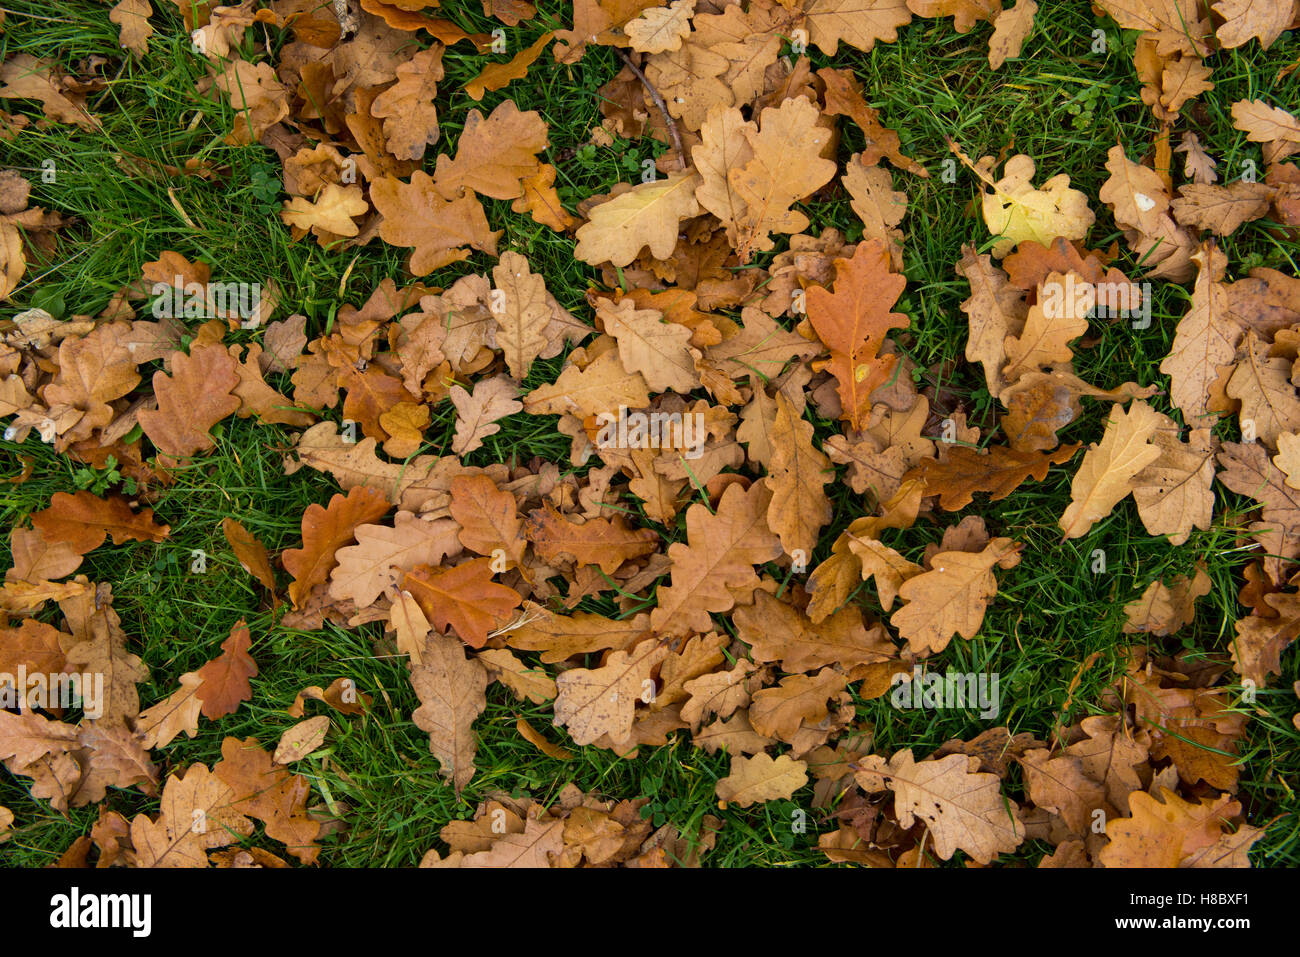 Golden brown fallen leaves of an English oak tree, Quercus robur lying on the grass in autumn, October Stock Photo